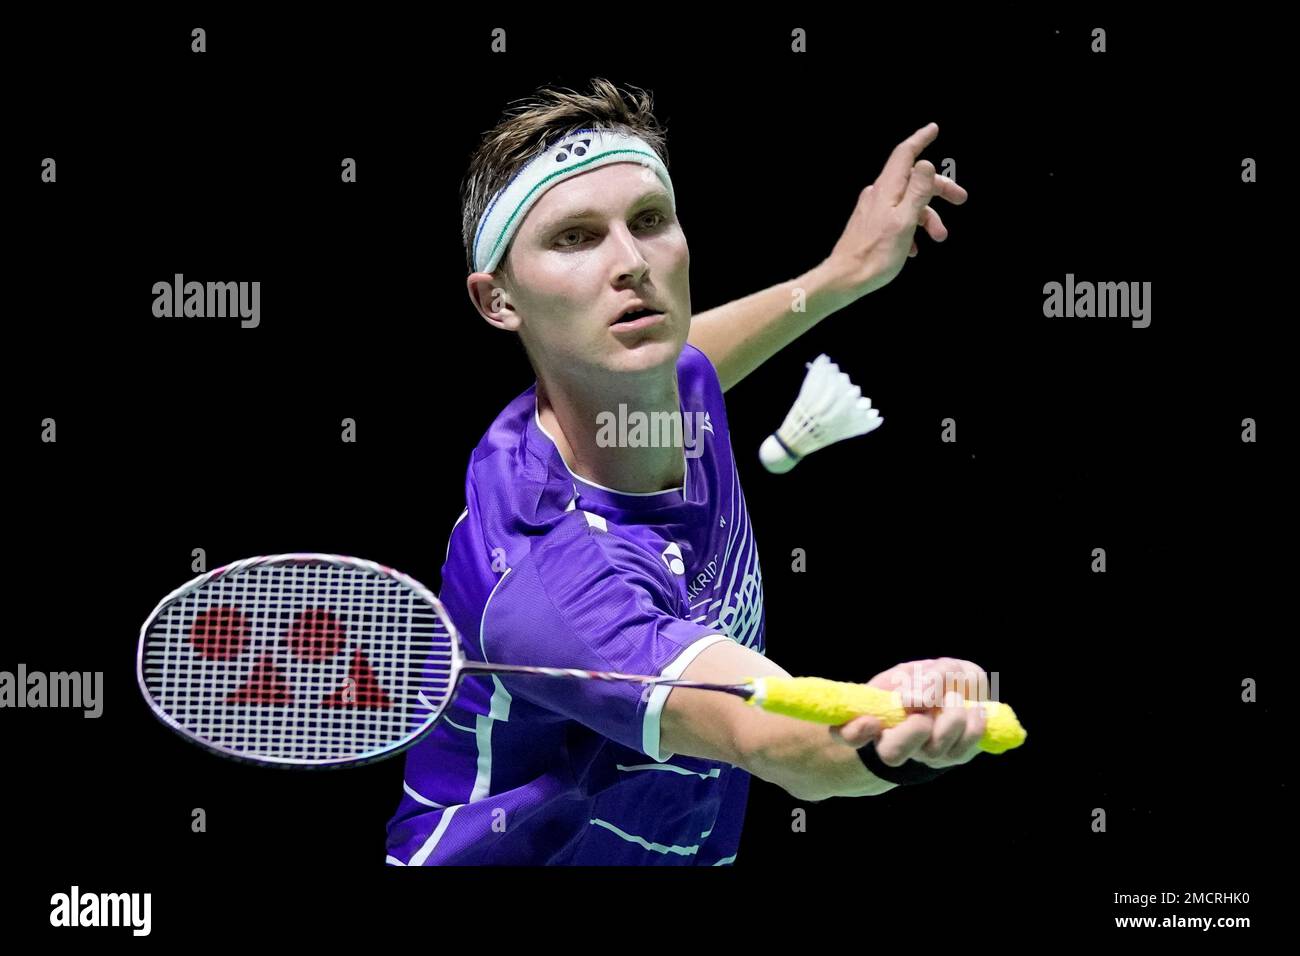 Denmarks Viktor Axelsen competes against Indias Lakshya Sen during their mens singles badminton group stage match at the BWF World Tour Finals in Nusa Dua, Bali, Indonesia, Thursday, Dec